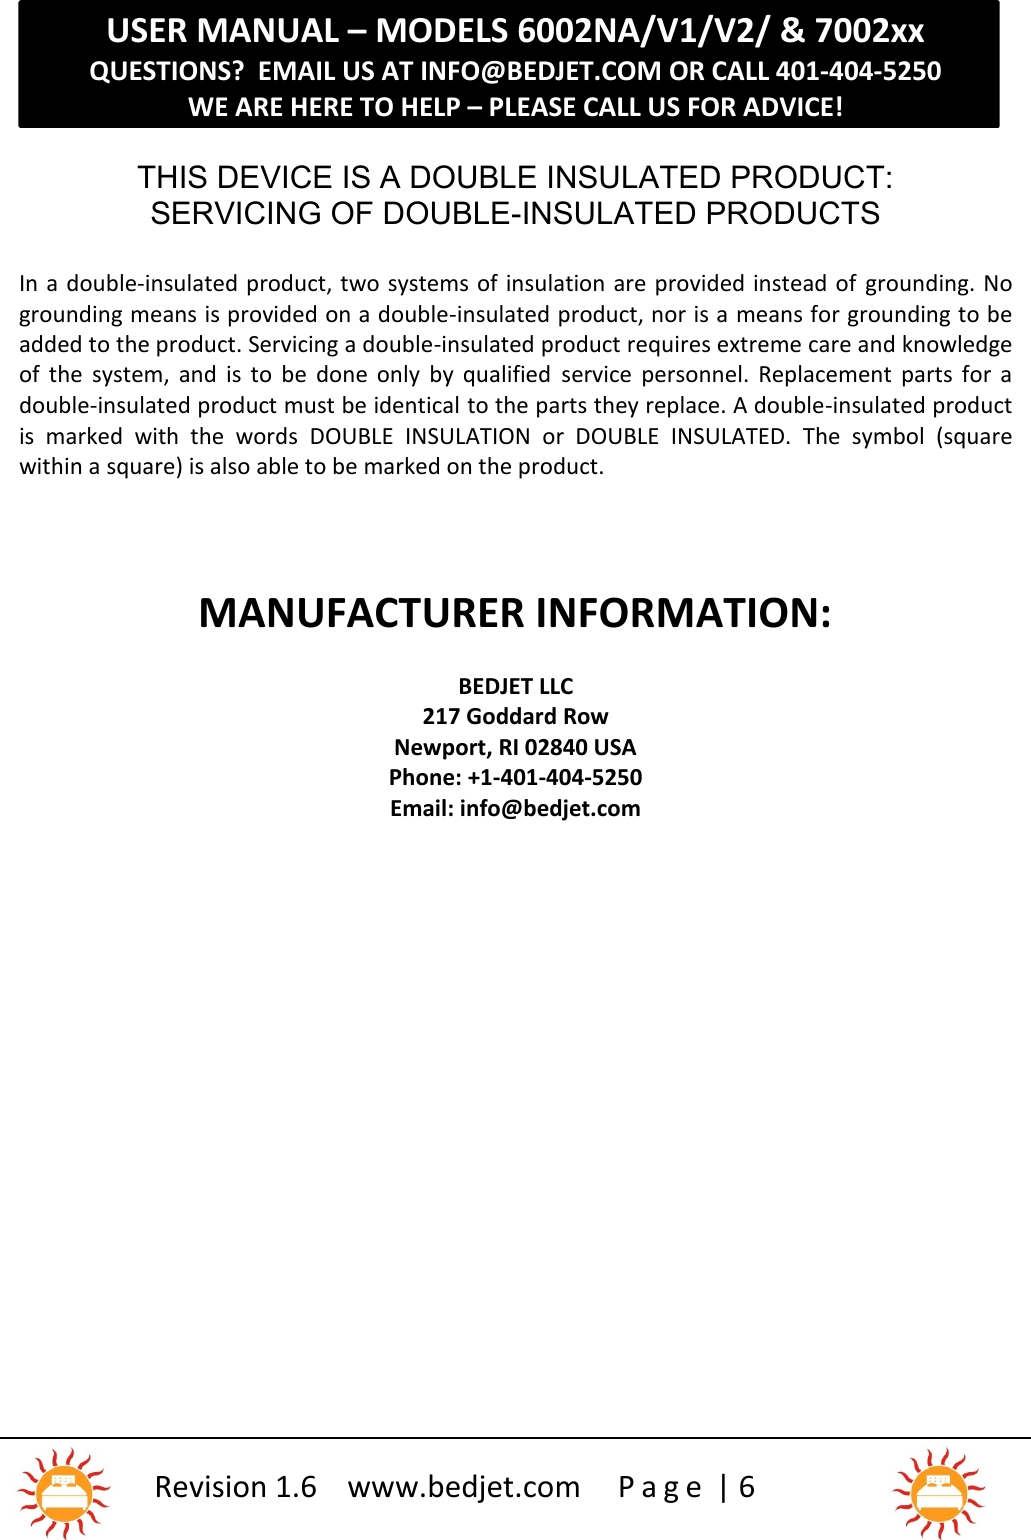 USER MANUAL – MODELS 6002NA/V1/V2/ &amp; 7002xxQUESTIONS?  EMAIL US AT INFO@BEDJET.COM OR CALL 401-404-5250WE ARE HERE TO HELP – PLEASE CALL US FOR ADVICE!Revision 1.6 www.bedjet.com P a g e | 6THIS DEVICE IS A DOUBLE INSULATED PRODUCT:SERVICING OF DOUBLE-INSULATED PRODUCTSIn a double-insulated product, two systems of insulation are provided instead of grounding. Nogrounding means is provided on a double-insulated product, nor is a means for grounding to beadded to the product. Servicing a double-insulated product requires extreme care and knowledgeof  the  system,  and  is  to  be  done  only  by  qualified service  personnel.  Replacement  parts  for  adouble-insulated product must be identical to the parts they replace. A double-insulated productis  marked  with  the  words DOUBLE  INSULATION or  DOUBLE  INSULATED. The  symbol  (squarewithin a square) is also able to be marked on the product.MANUFACTURER INFORMATION:BEDJET LLC217 Goddard RowNewport, RI 02840 USAPhone: +1-401-404-5250Email: info@bedjet.com